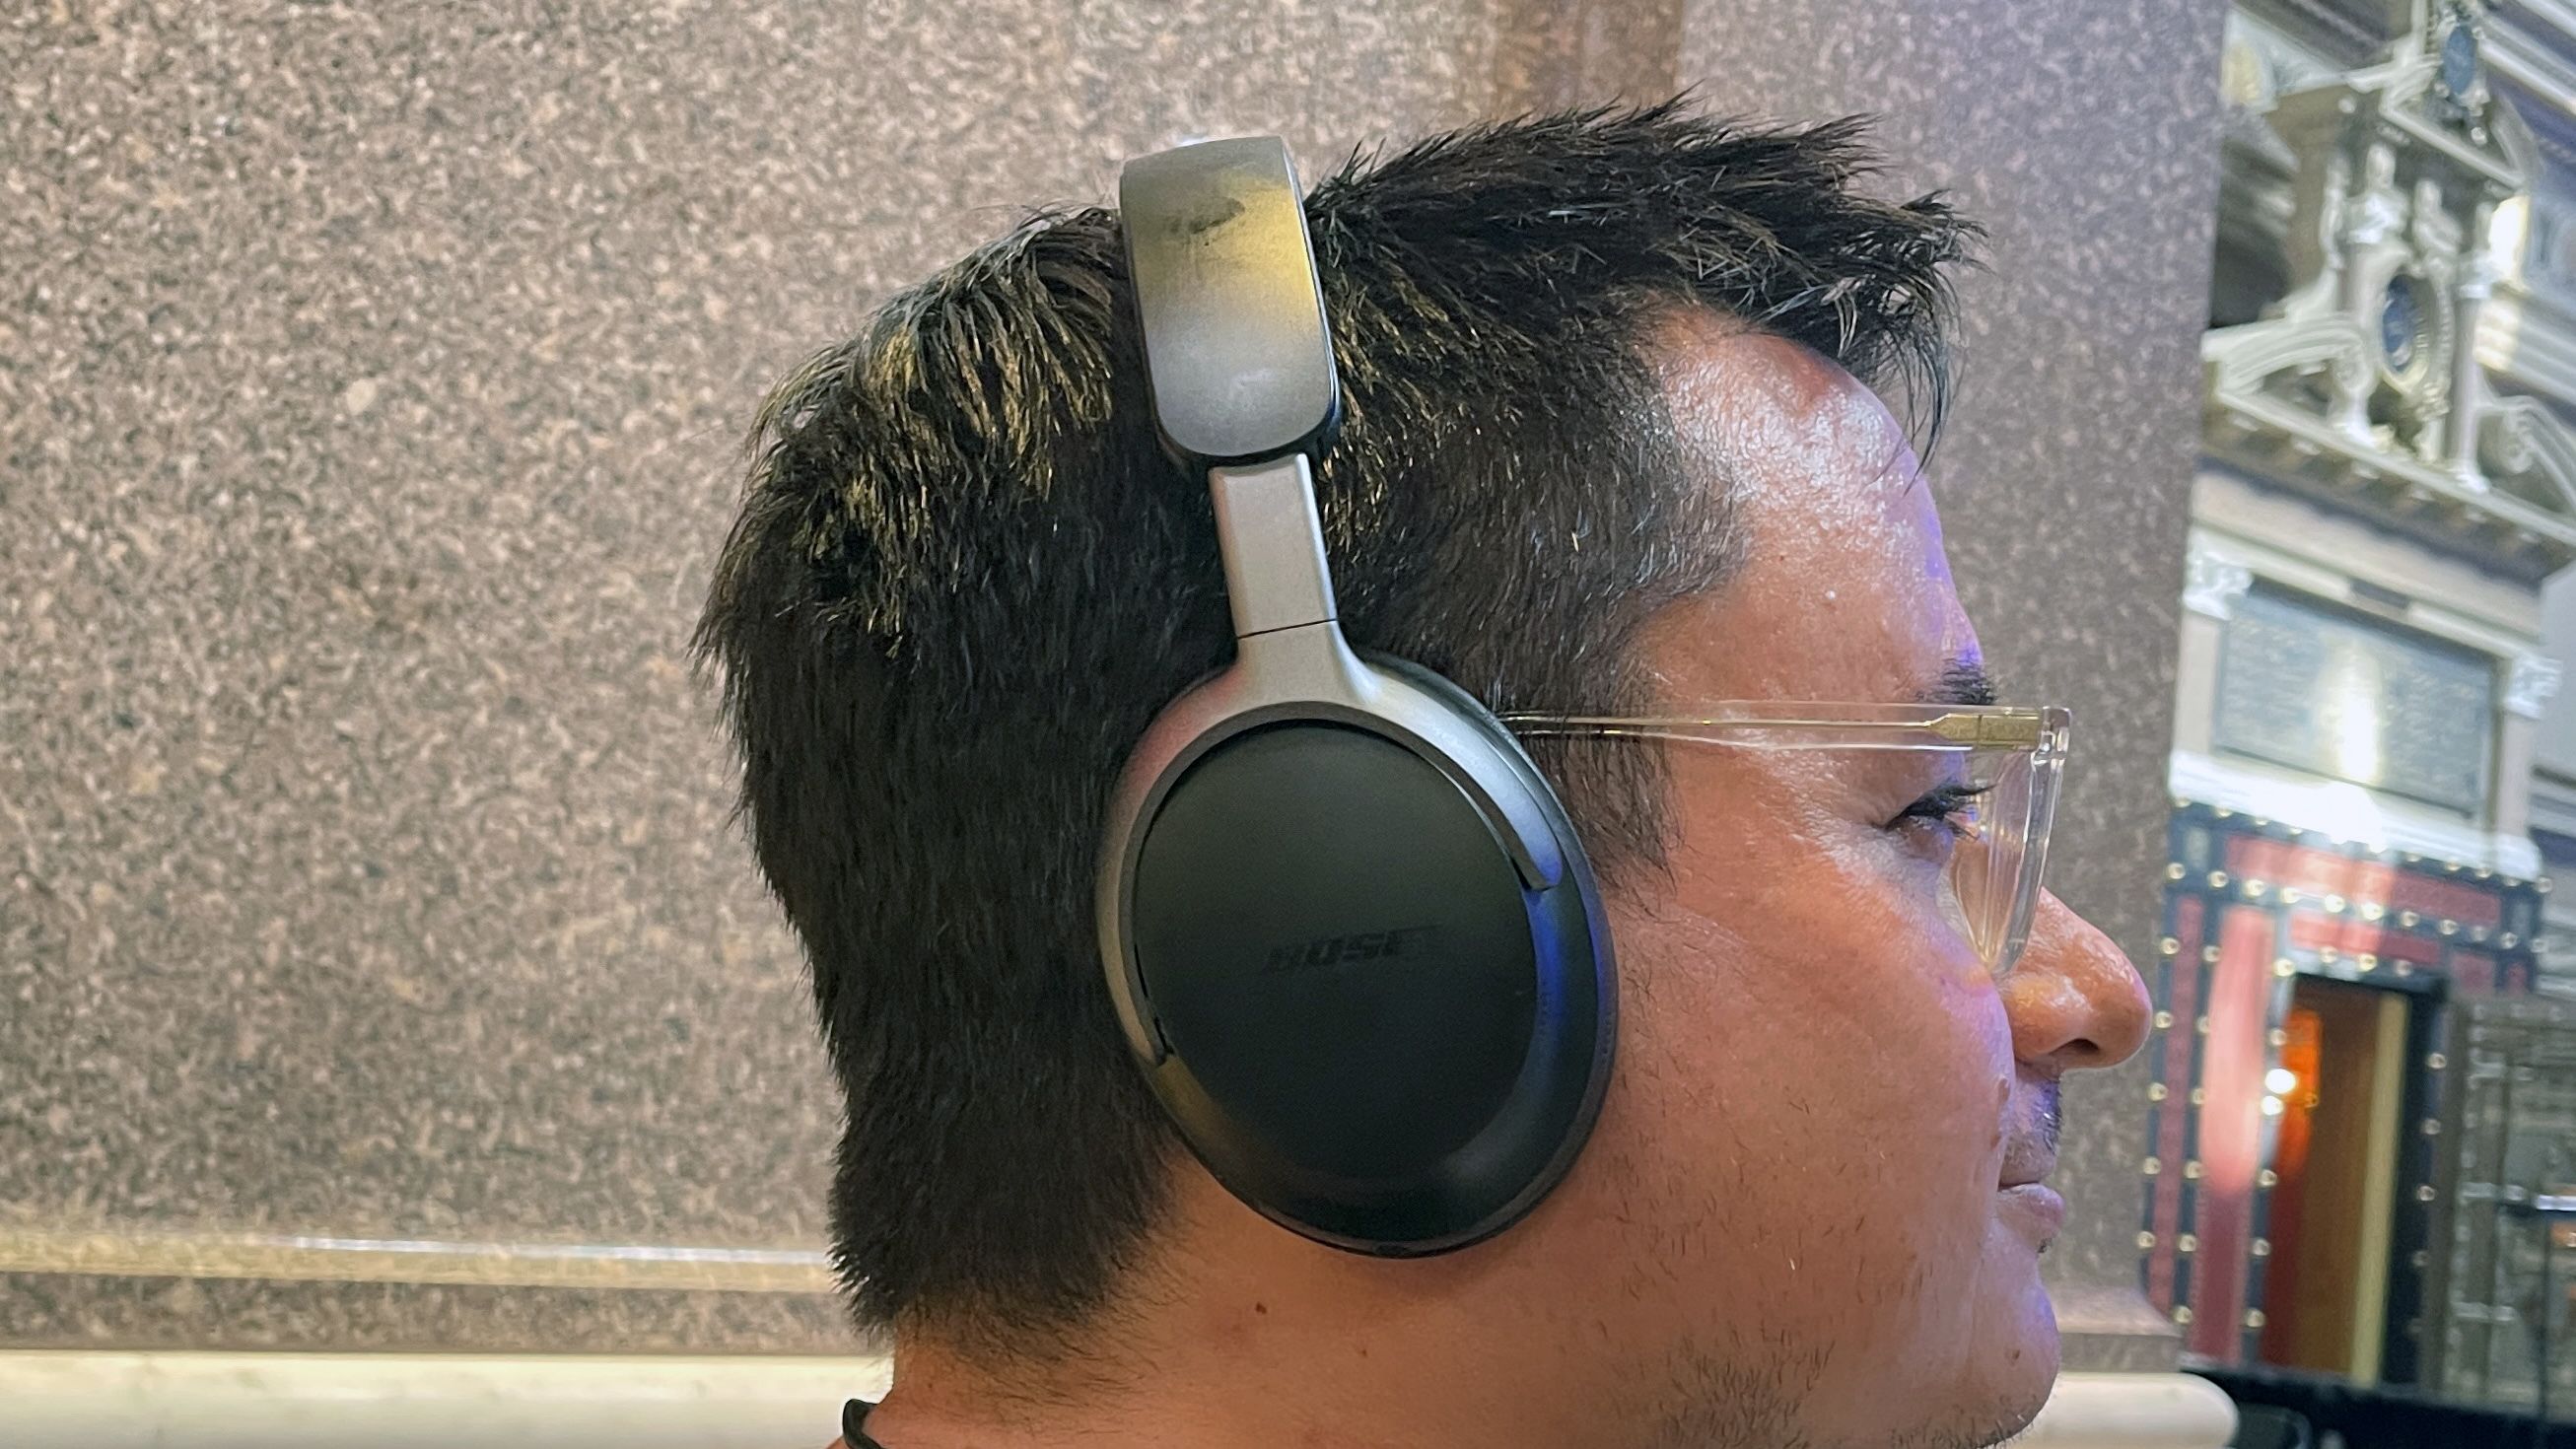 Get these if you want a BOSE HEADPHONE - Bose Quietcomfort SE Review 